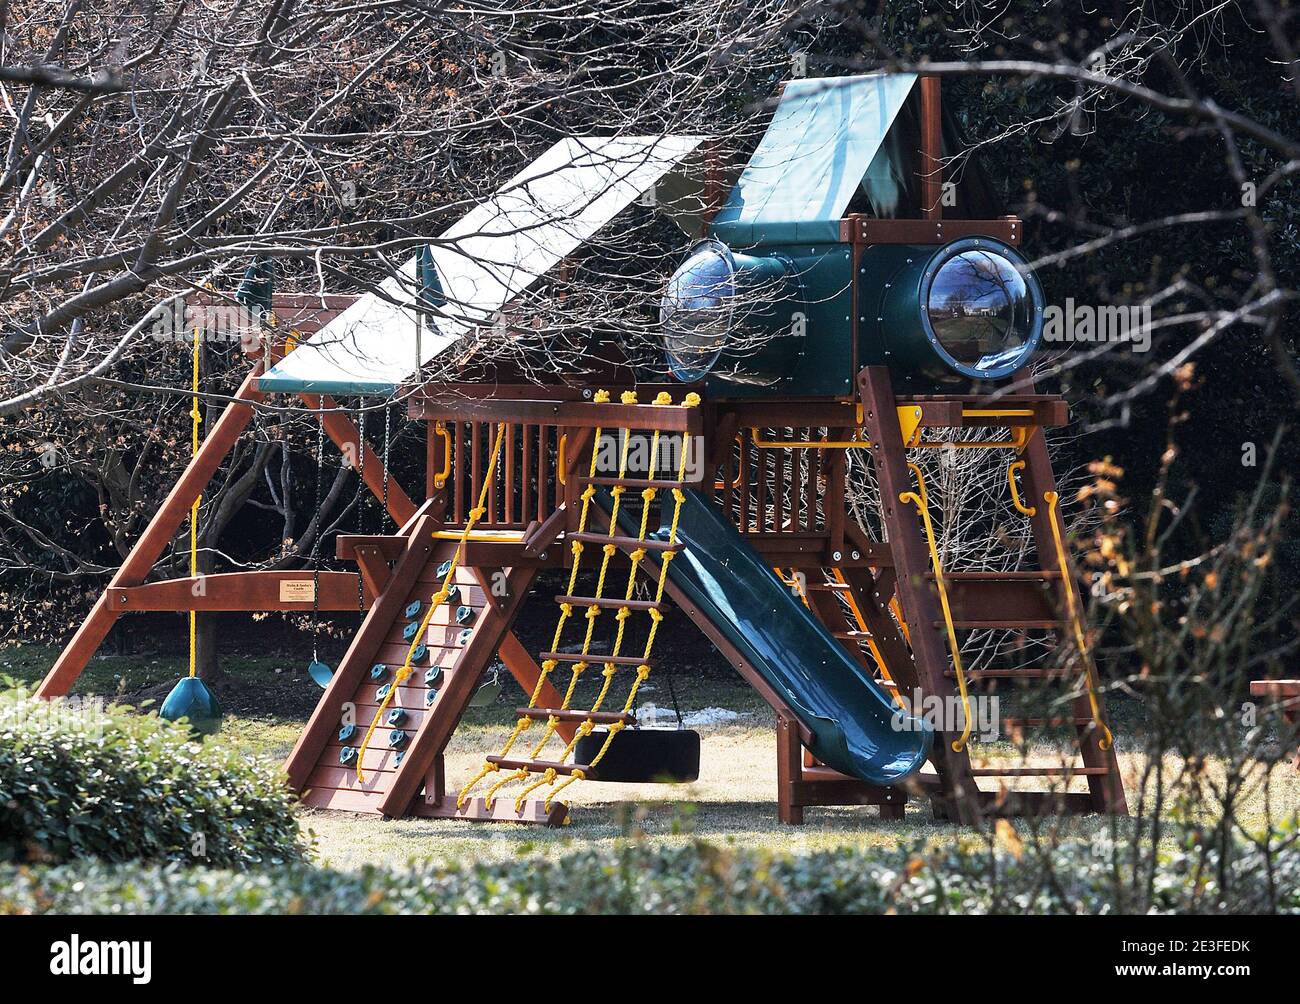 The new playground equipment installed on the lawn outside the Oval office for President Obama's daughters on March 6, 2009 in Washington, DC, USA. Photo by Olivier Douliery/ABACAPRESS.COM Stock Photo